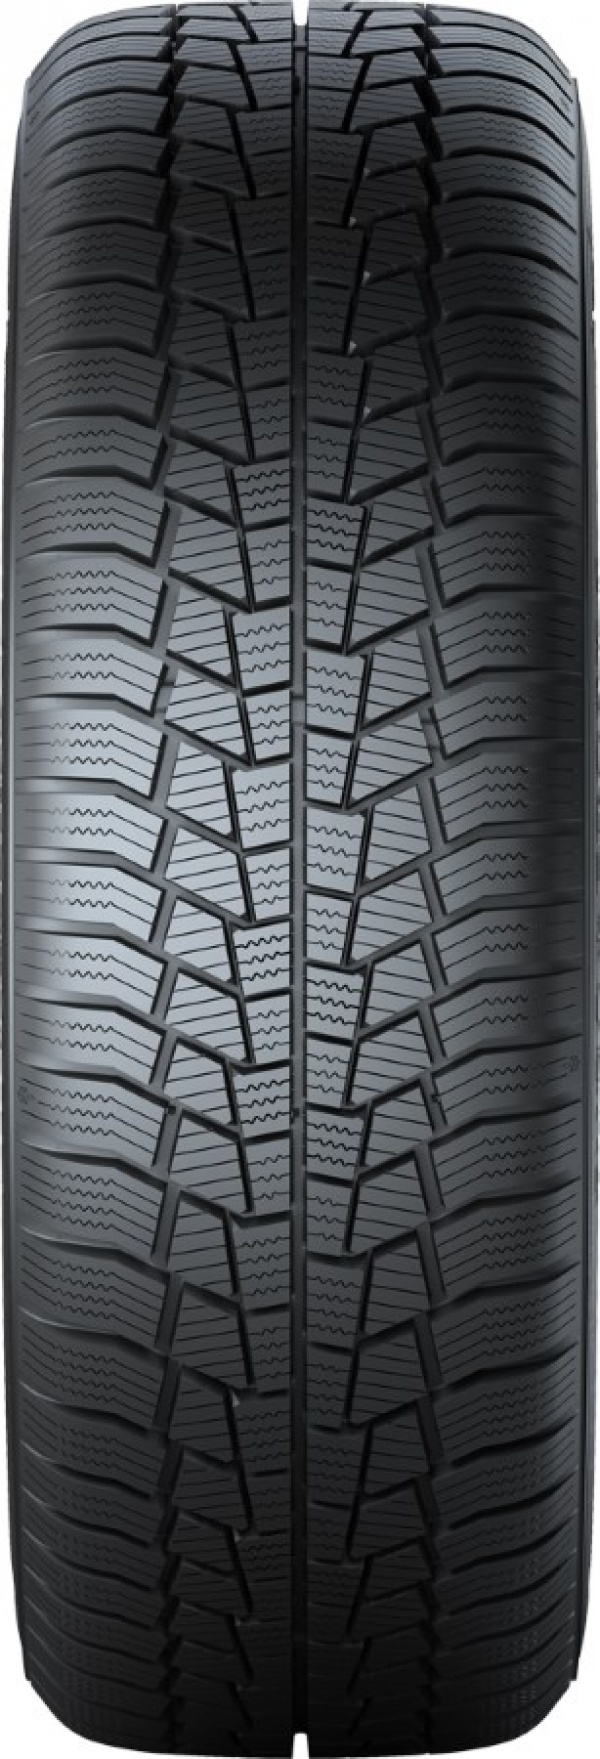 Gislaved Euro Frost 6 195/60 R15 88T  не шип